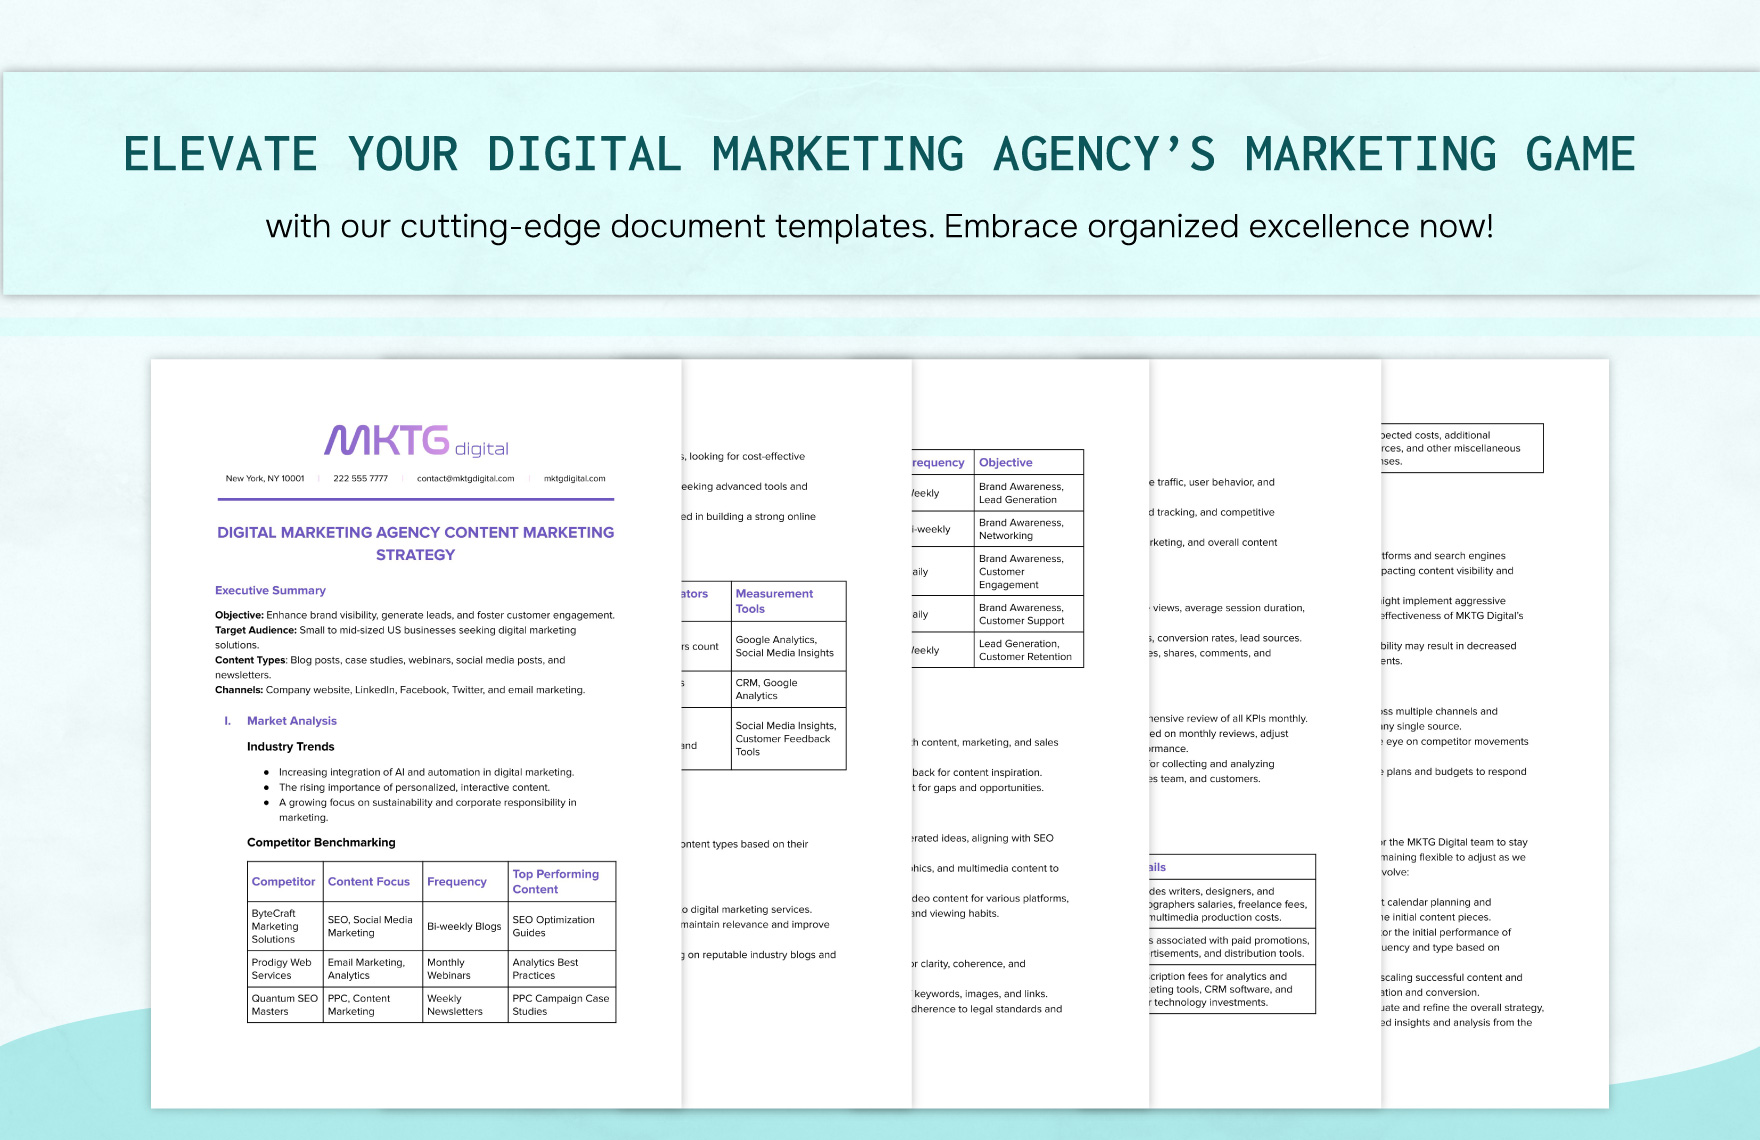 Digital Marketing Agency Content Marketing Strategy Template